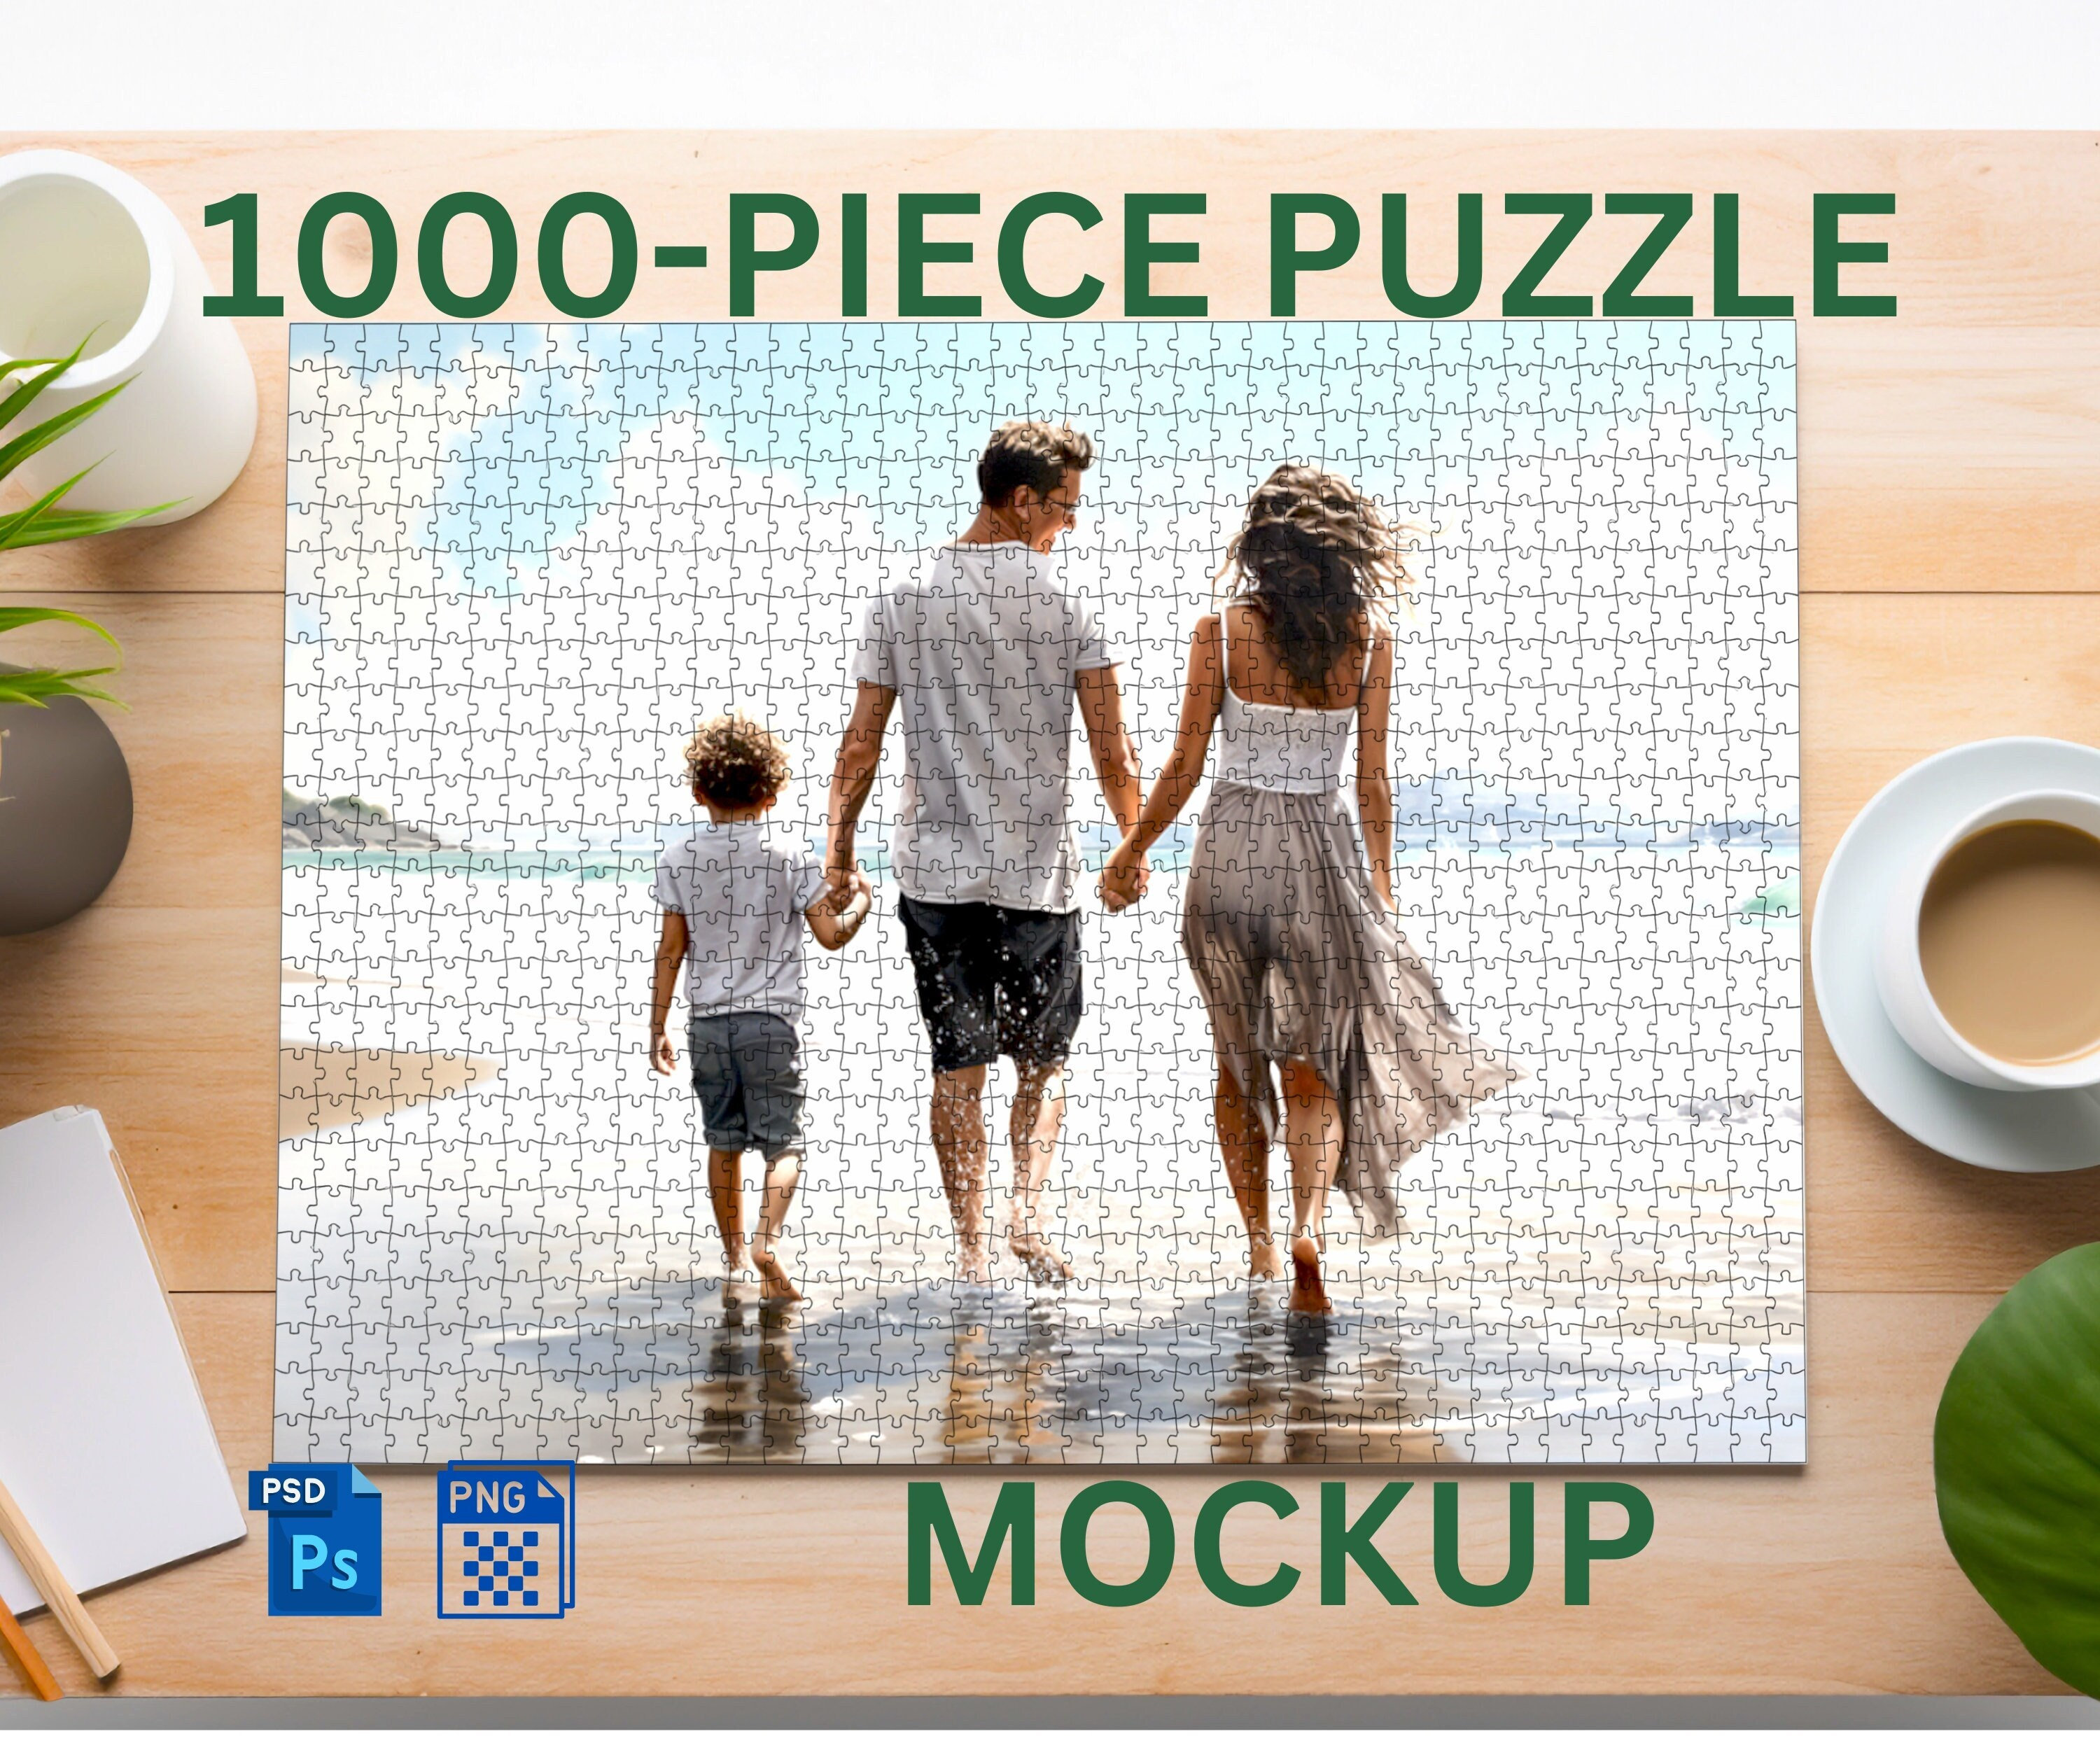 10 Sheets Blank Puzzles for Kids, 3.9 x 3.9 Inch Blank Puzzles to Draw On  Bulk 12 Piece Make Your Own Jigsaw Puzzle All White DIY Puzzles for  Birthday